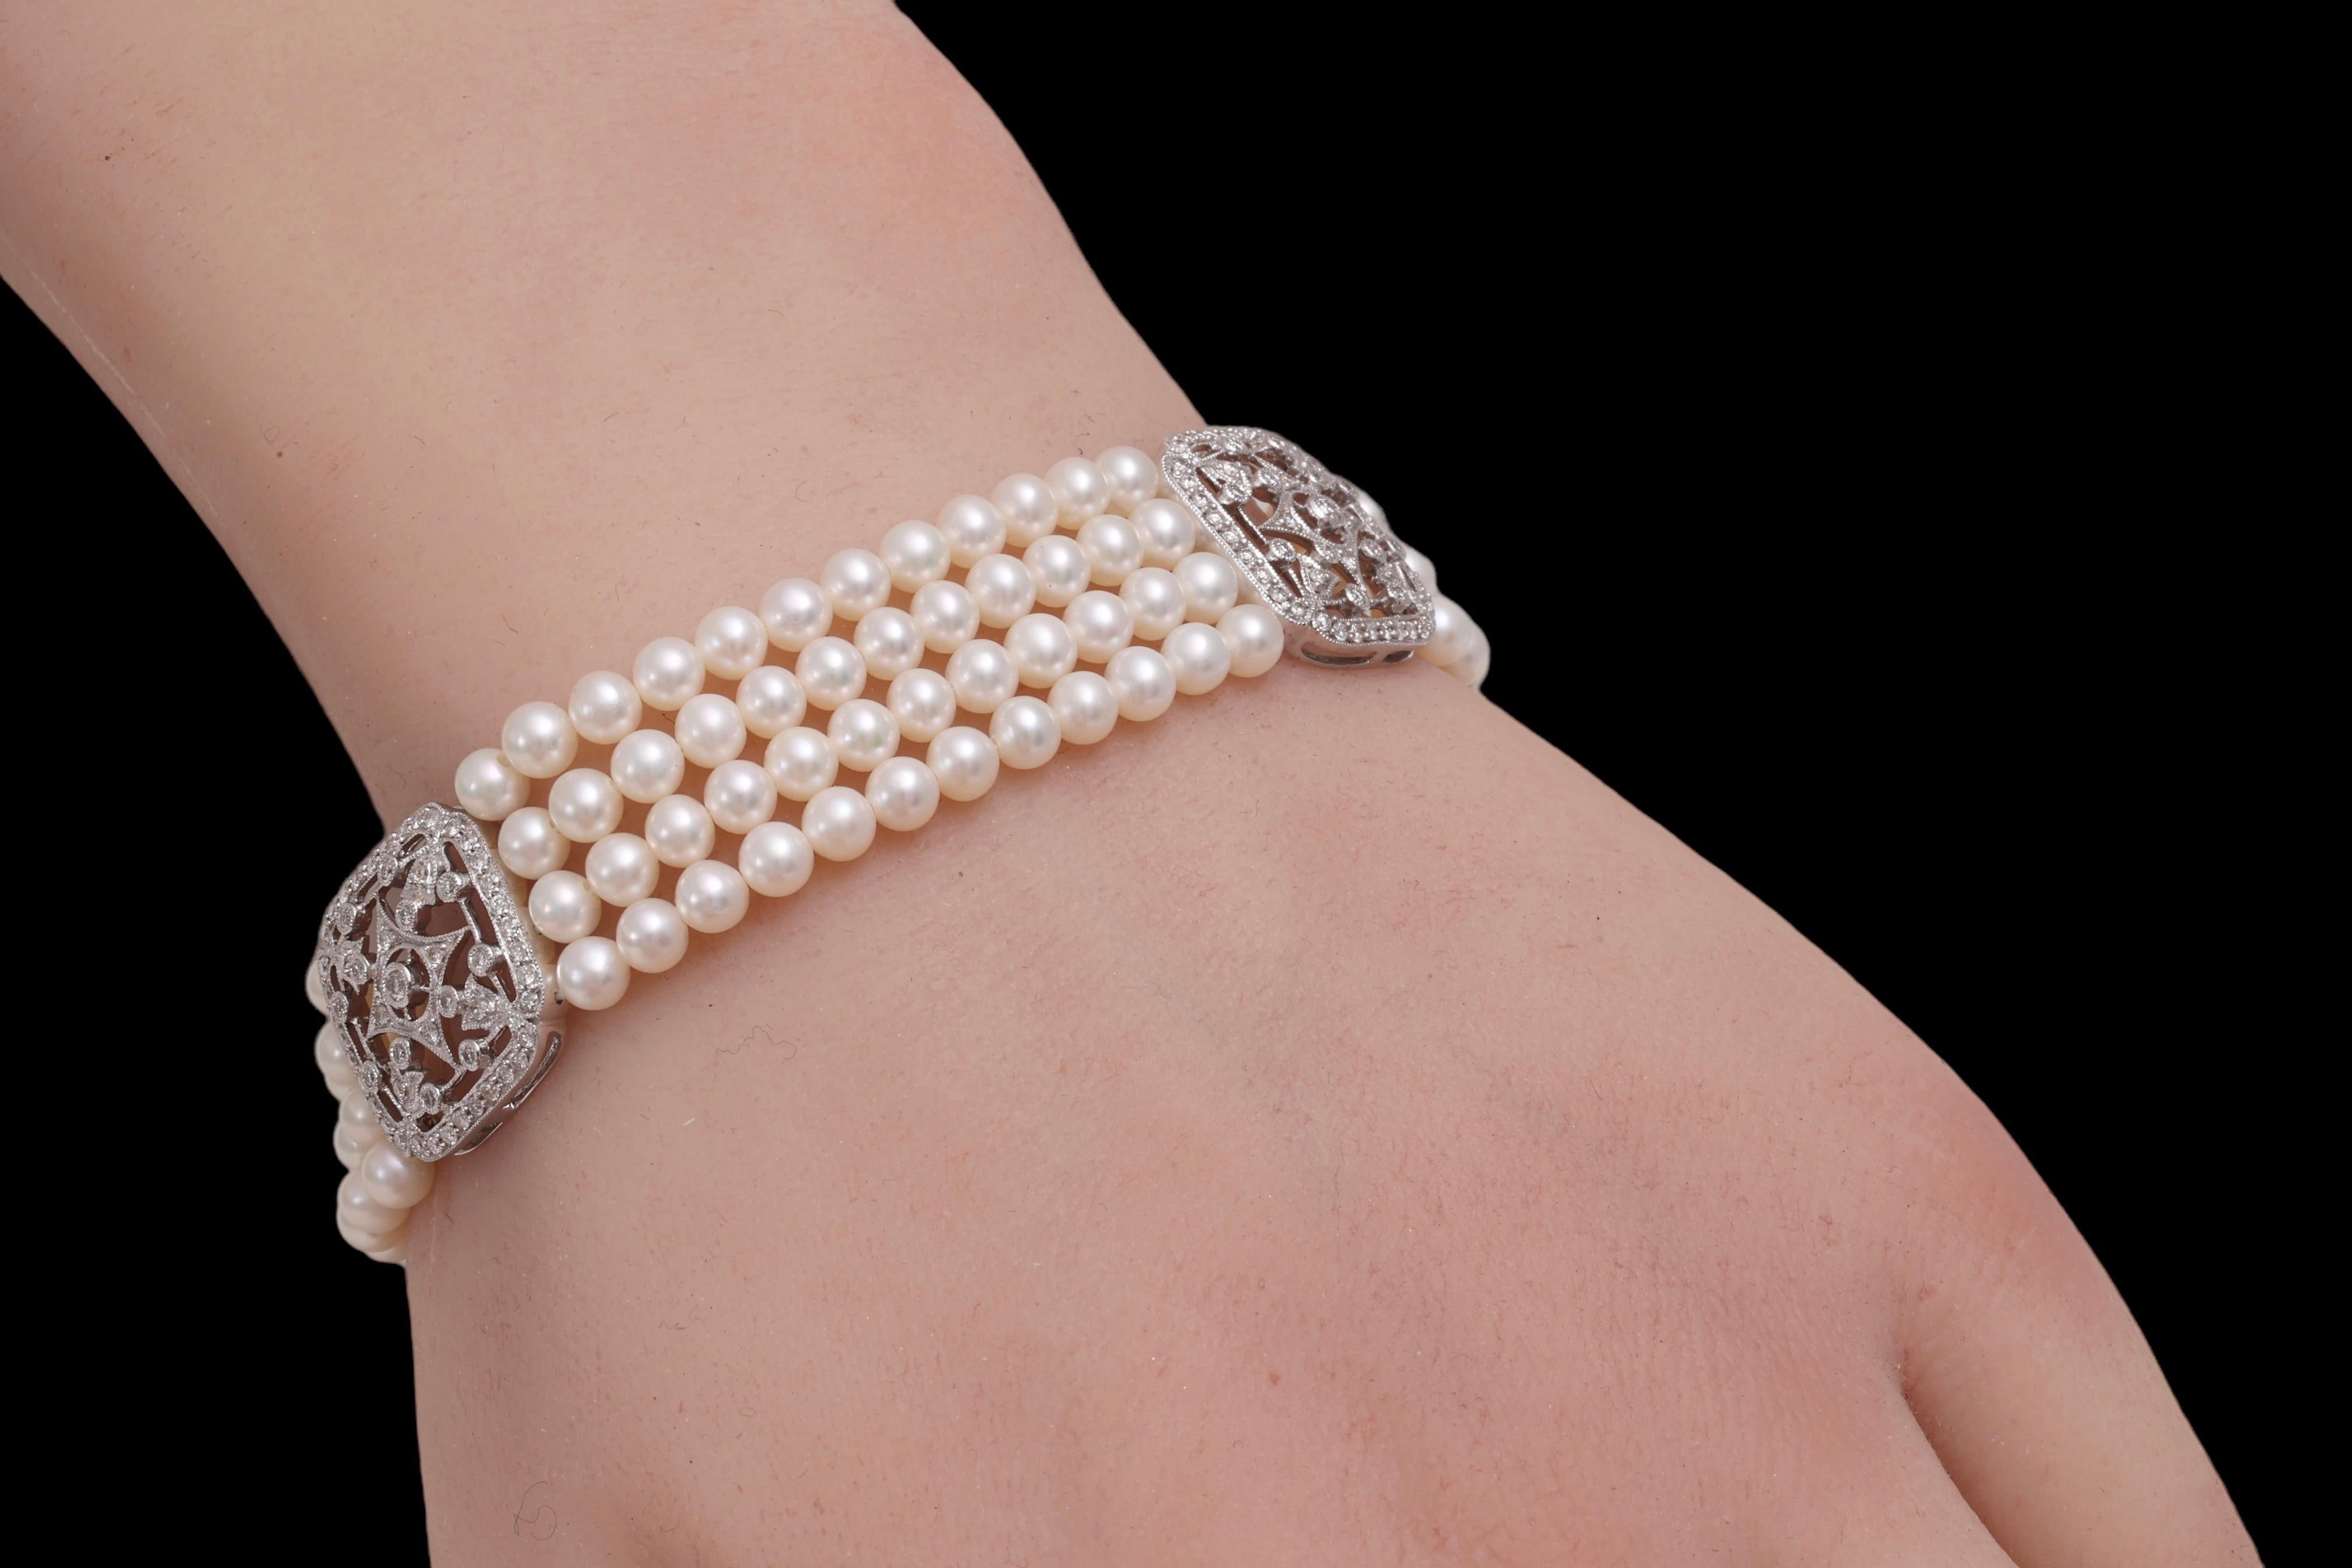 18 kt. White Gold Bracelet with 4 Rows of Pearls and 1.06 ct. Diamonds For Sale 3